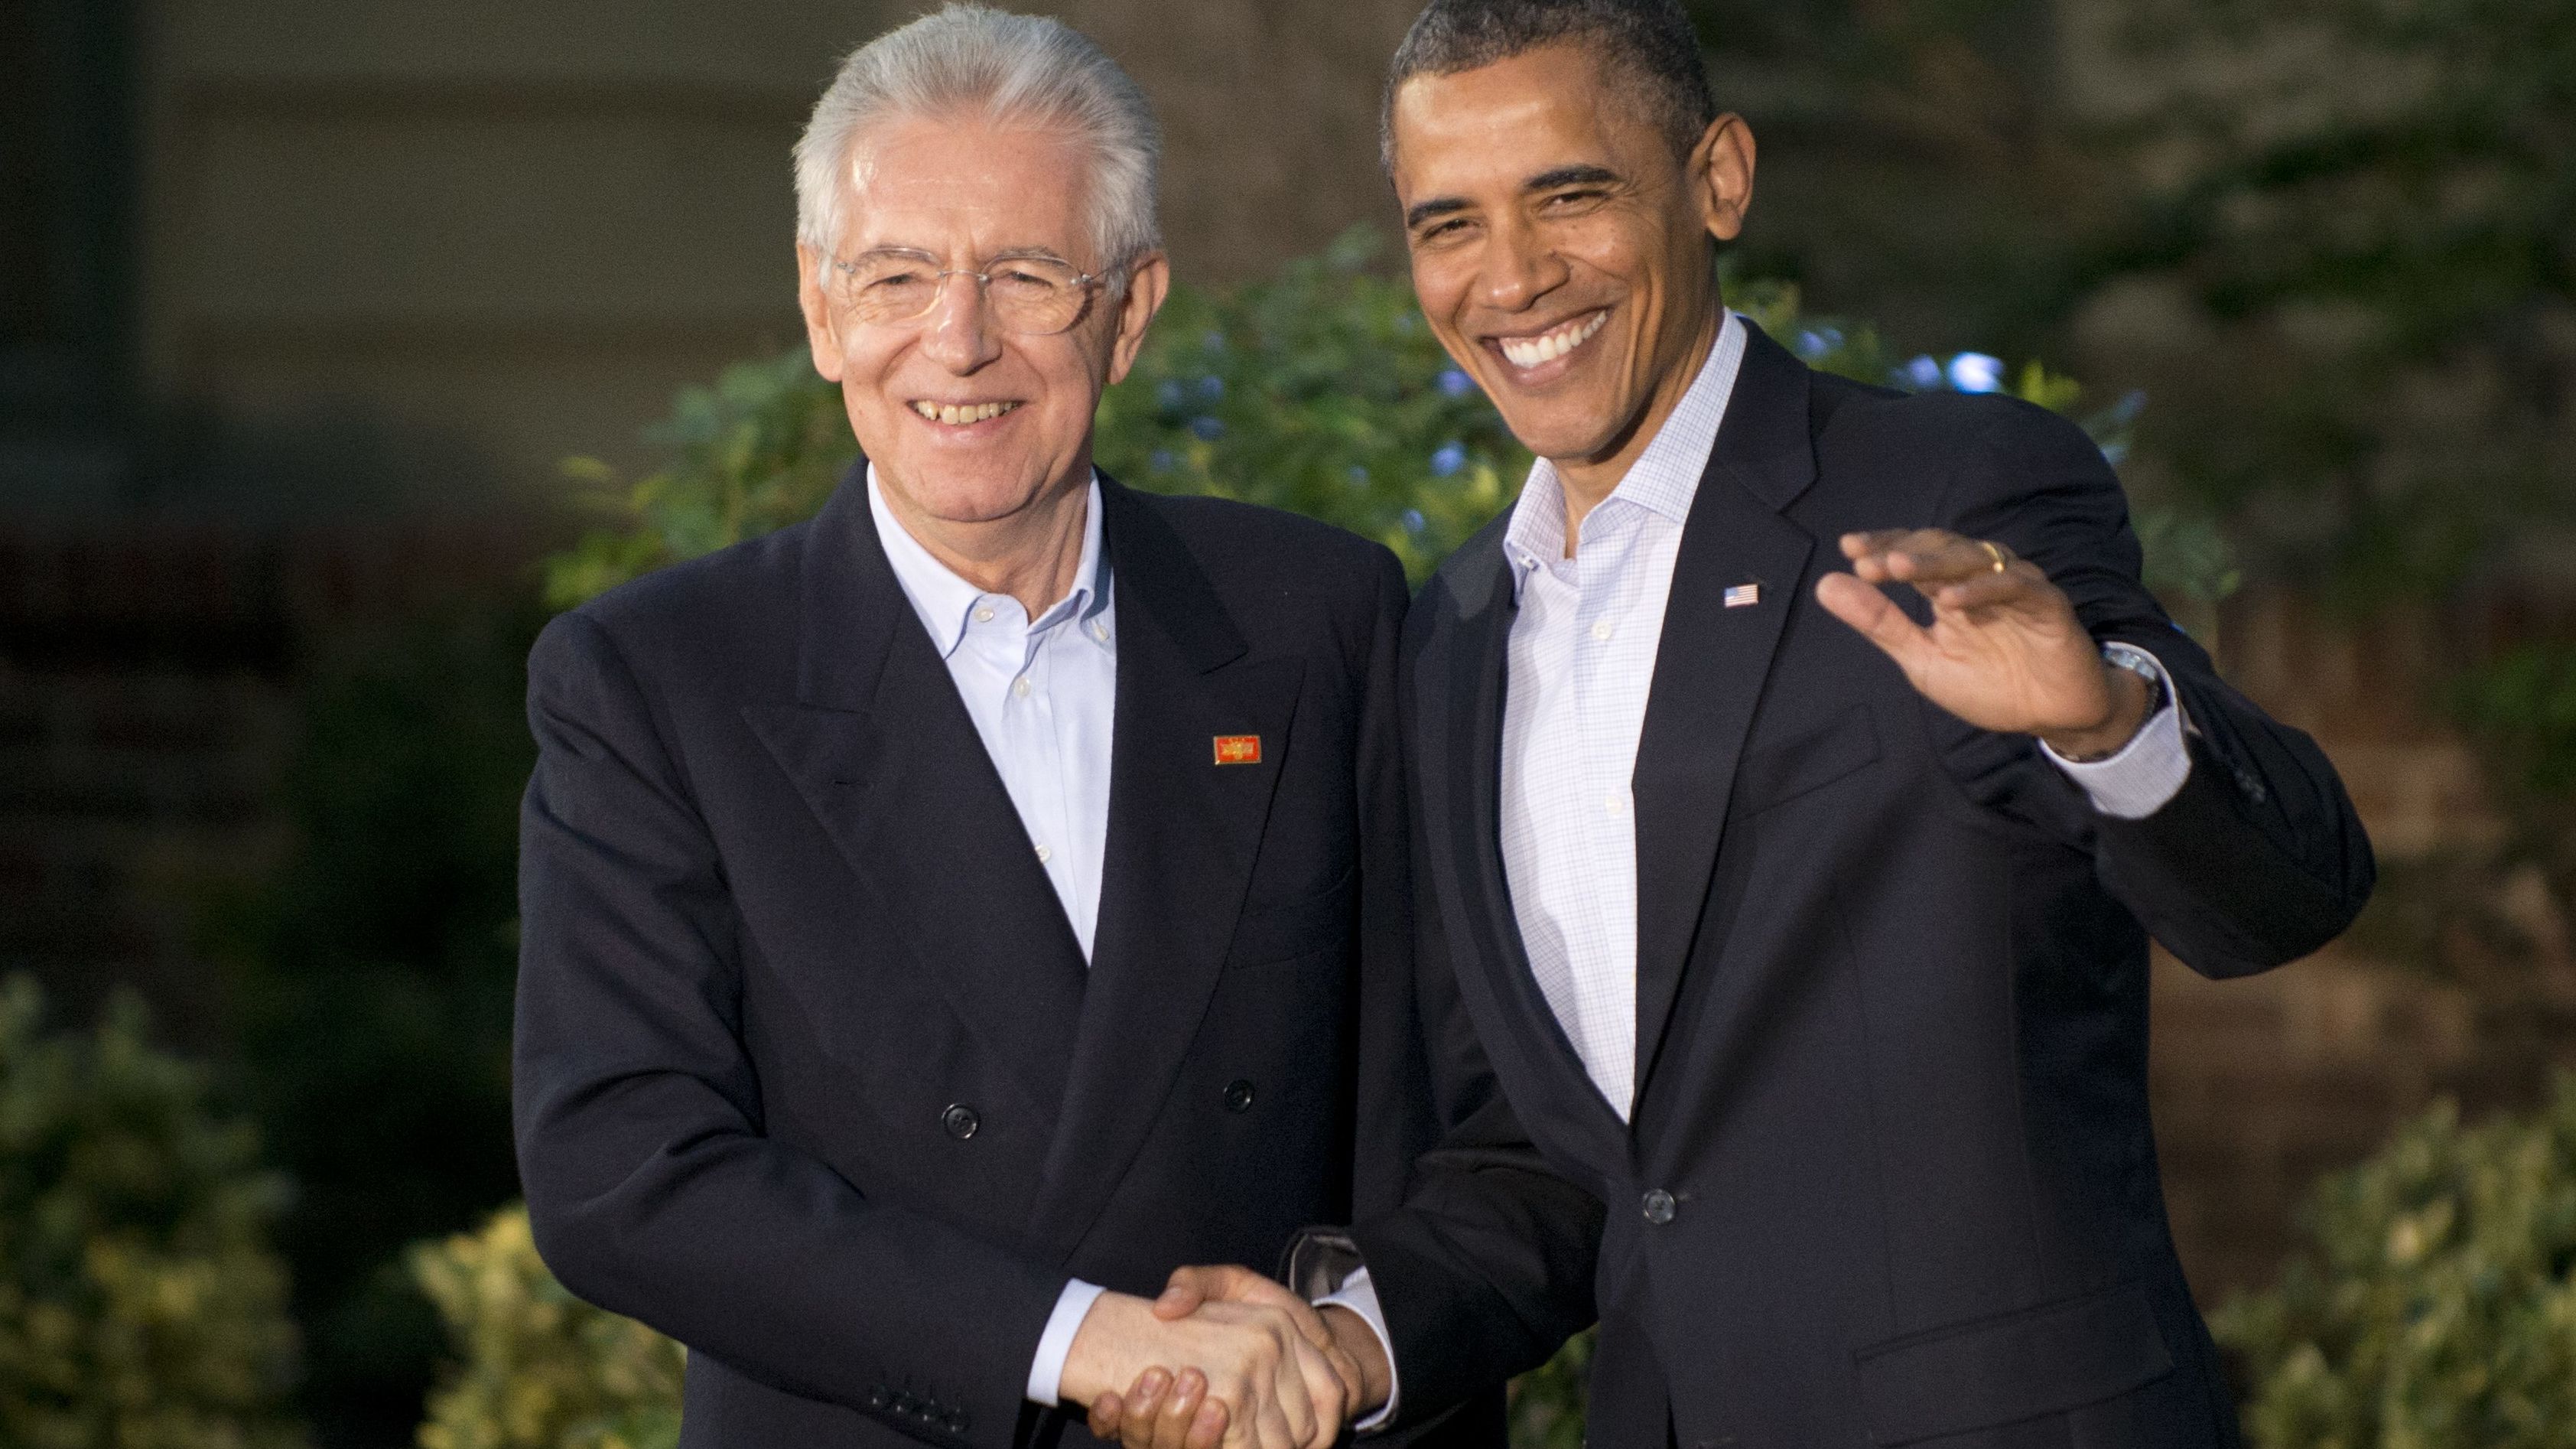 President Barack Obama greets Italian Prime Minister Mario Monti upon his arrival at Camp David in Maryland on Friday.